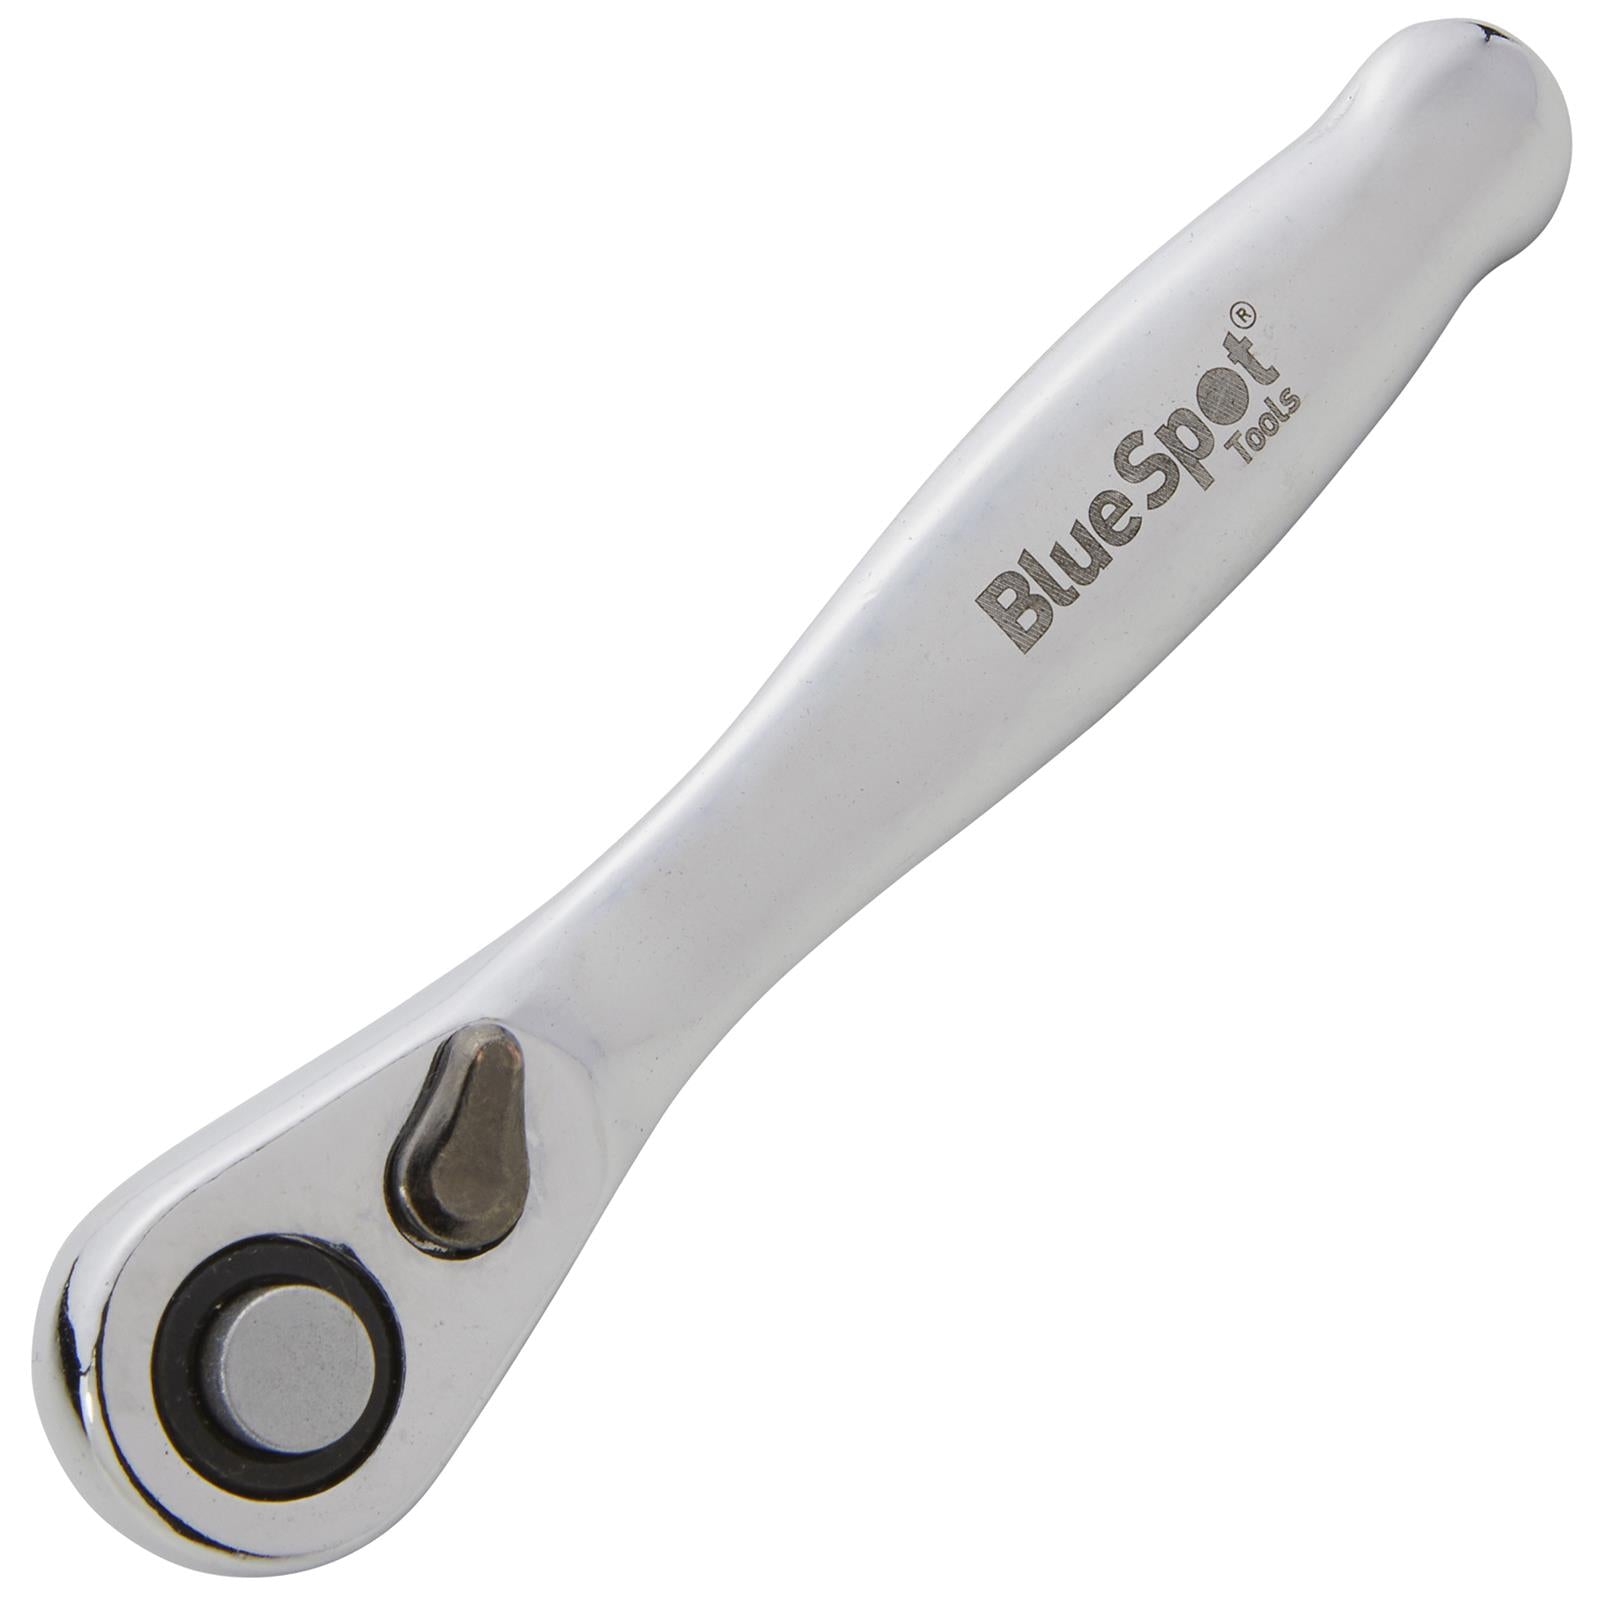 BlueSpot Micro Ratchet Handle Socket Wrench 1/4" Drive 72 Tooth